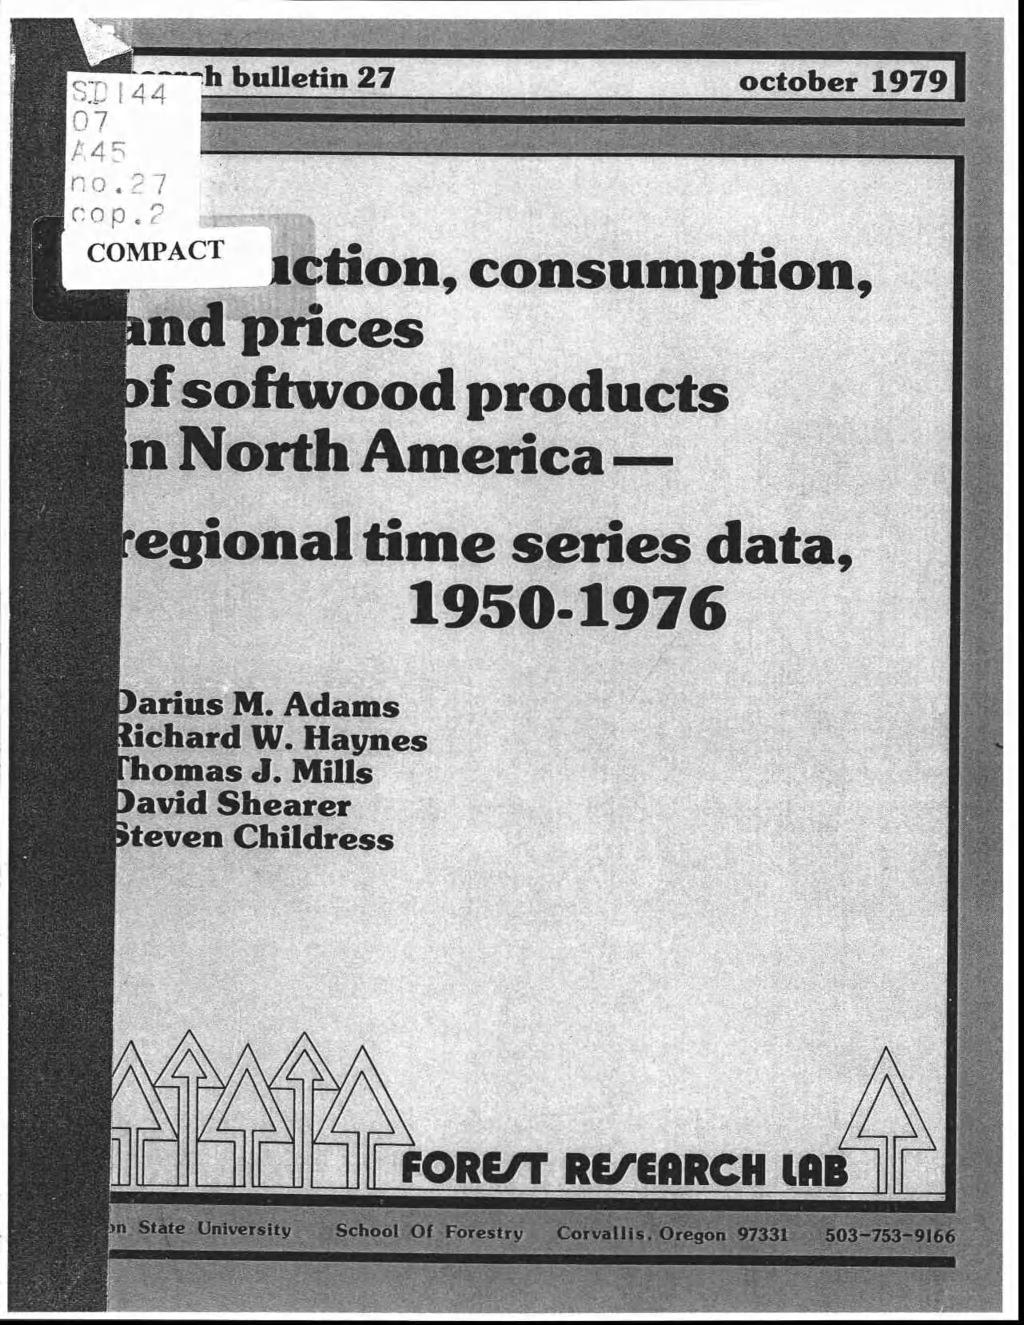 Th 44 07 A45 no.27 a:r.op.2 COMPACT -h bulletin 27 october 1979 action, consumption, Id-prices if softwood products n North America regional time series data, 1950.1976 I arius M.